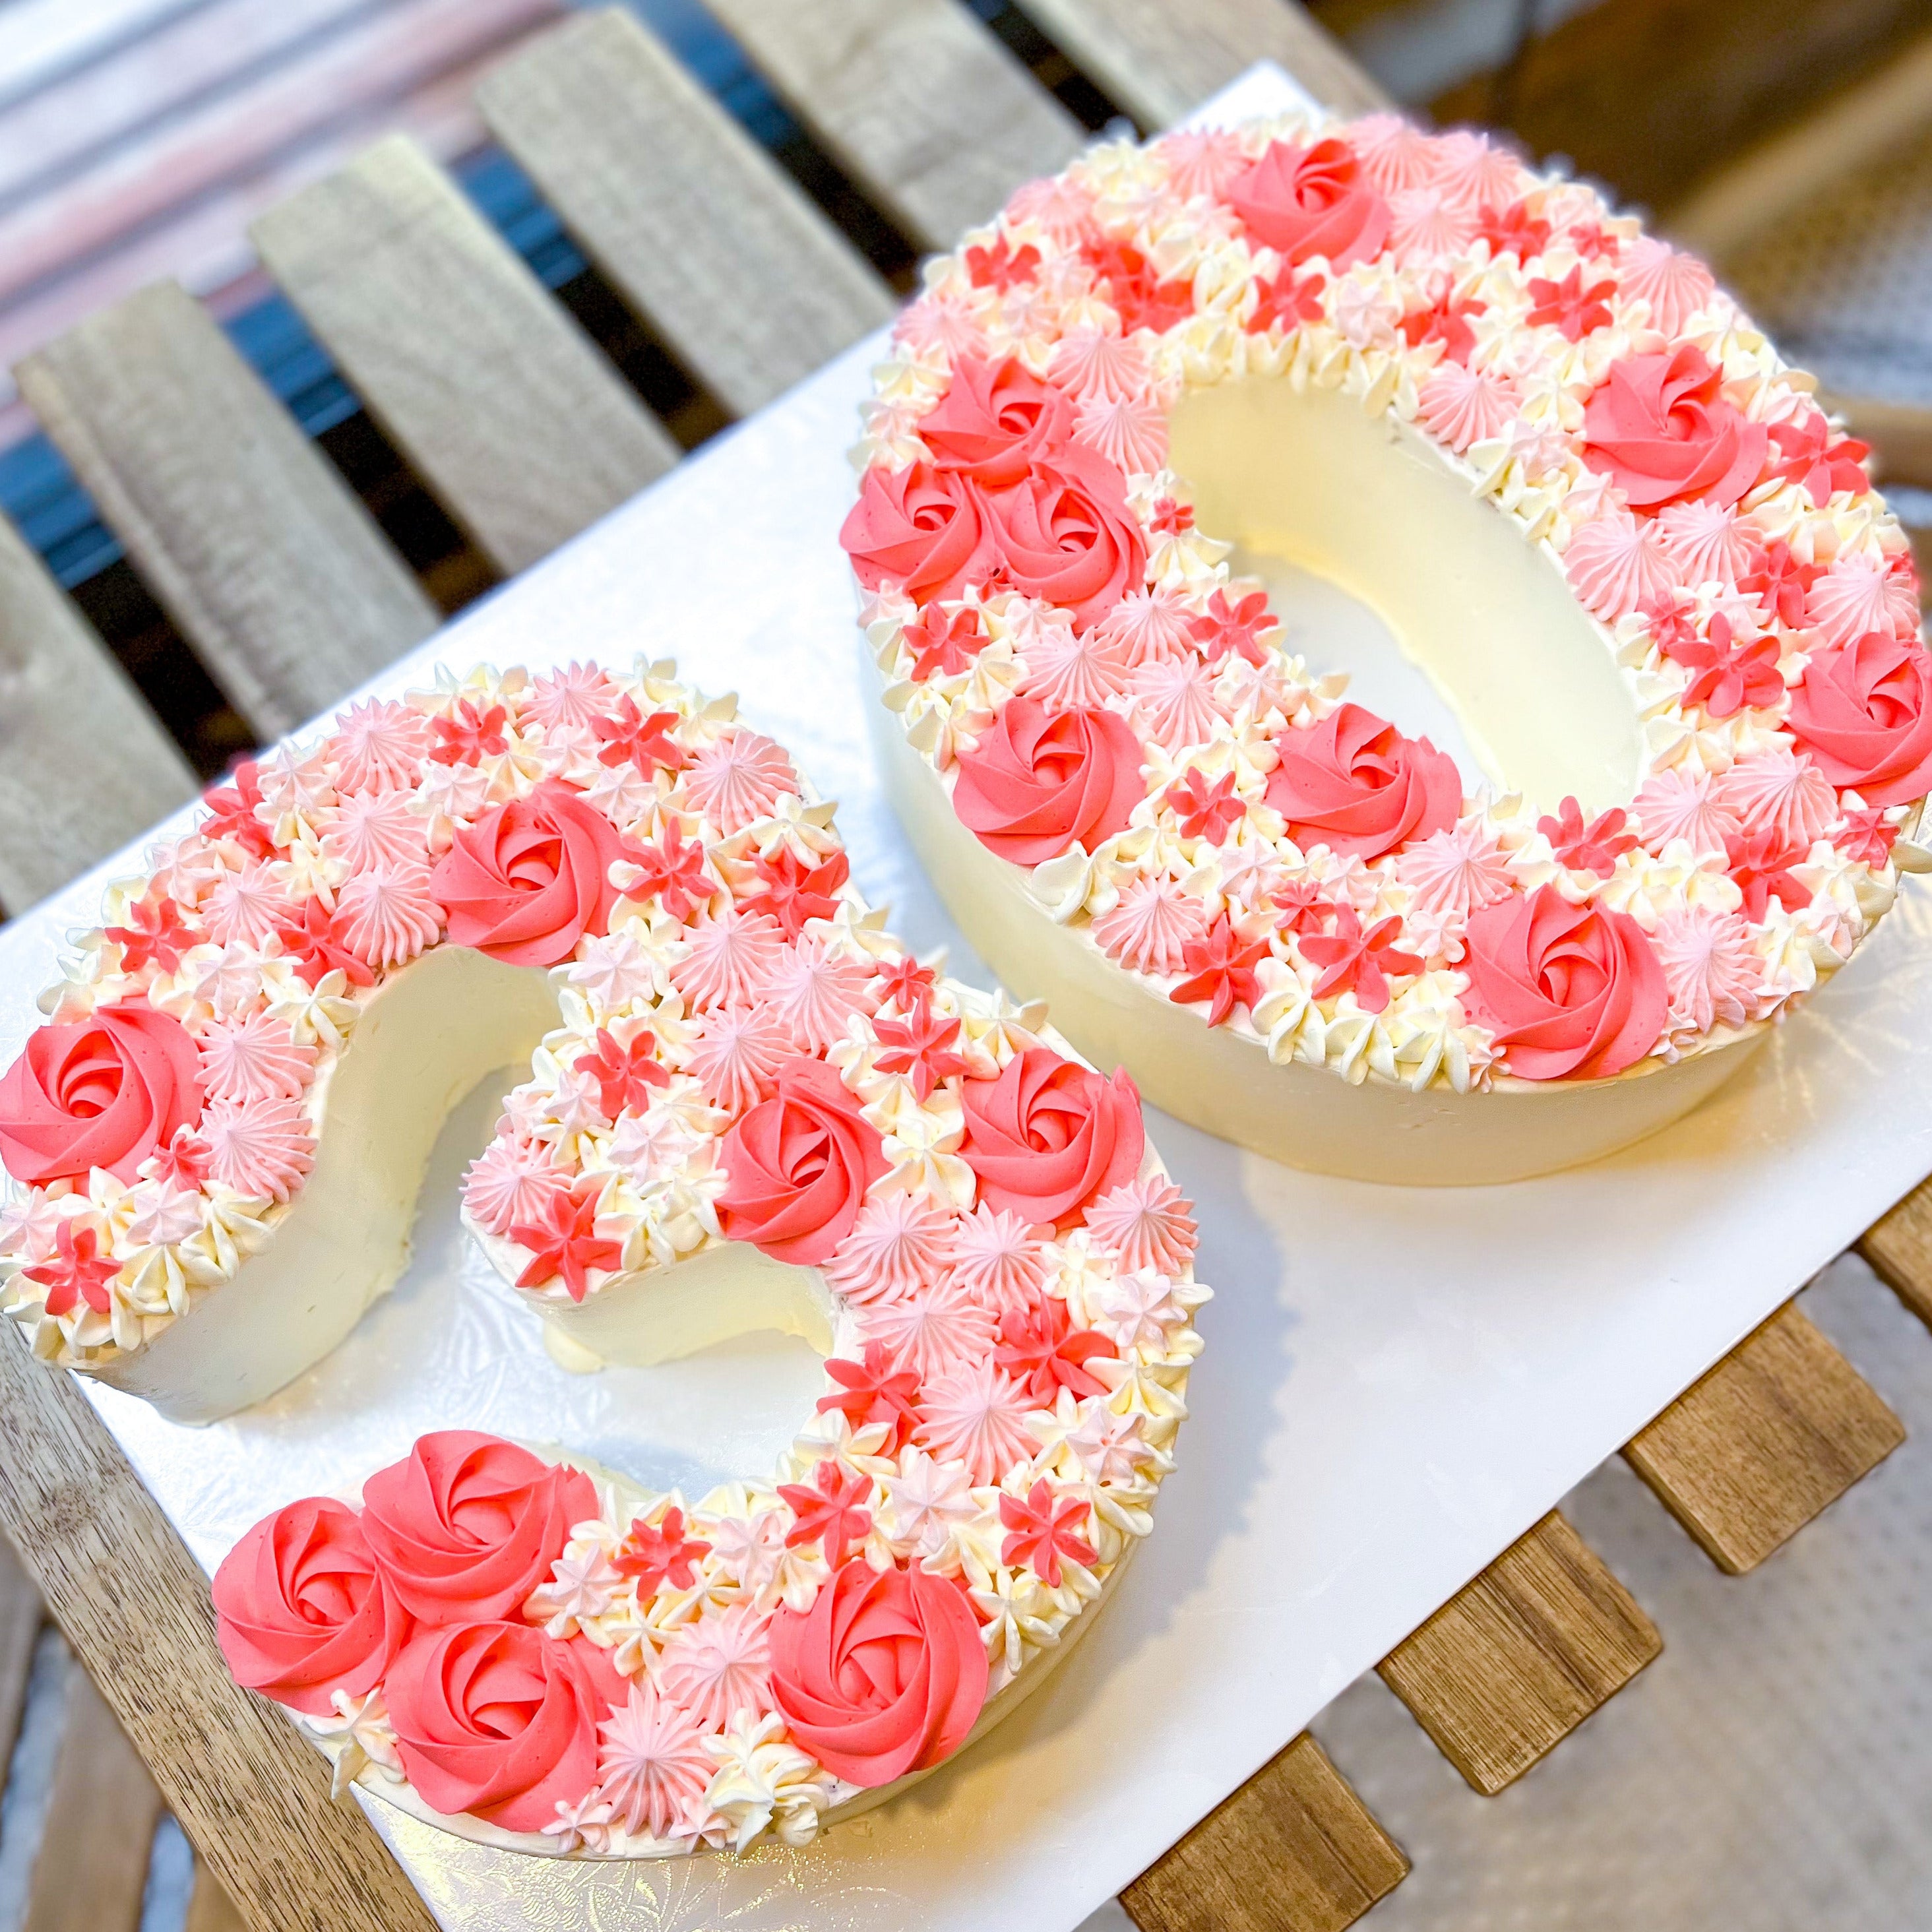 Order Number Cake With Dreamy Rose Design Online, Price Rs.2800 | FlowerAura